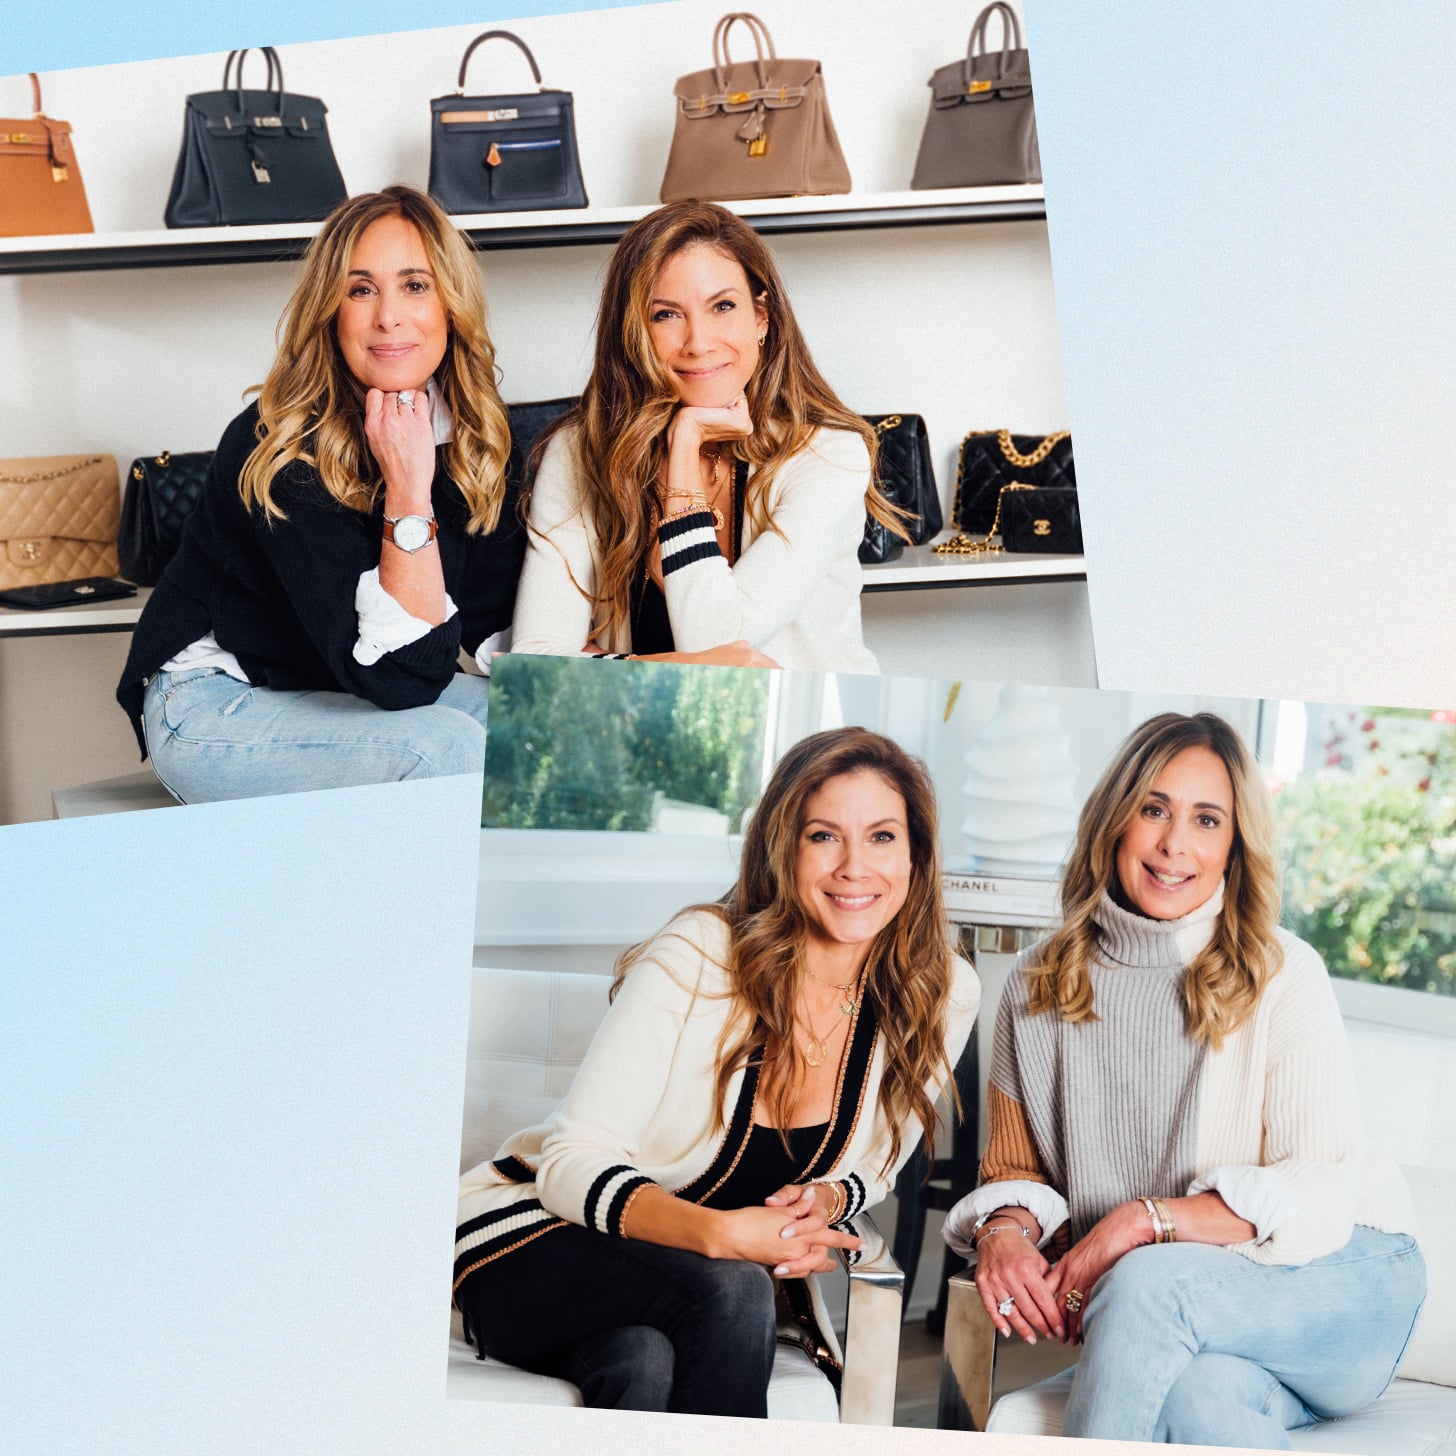 Lux & Nyx Invites Fellow Fashionistas to Contribute to a Specialty Bag  Design